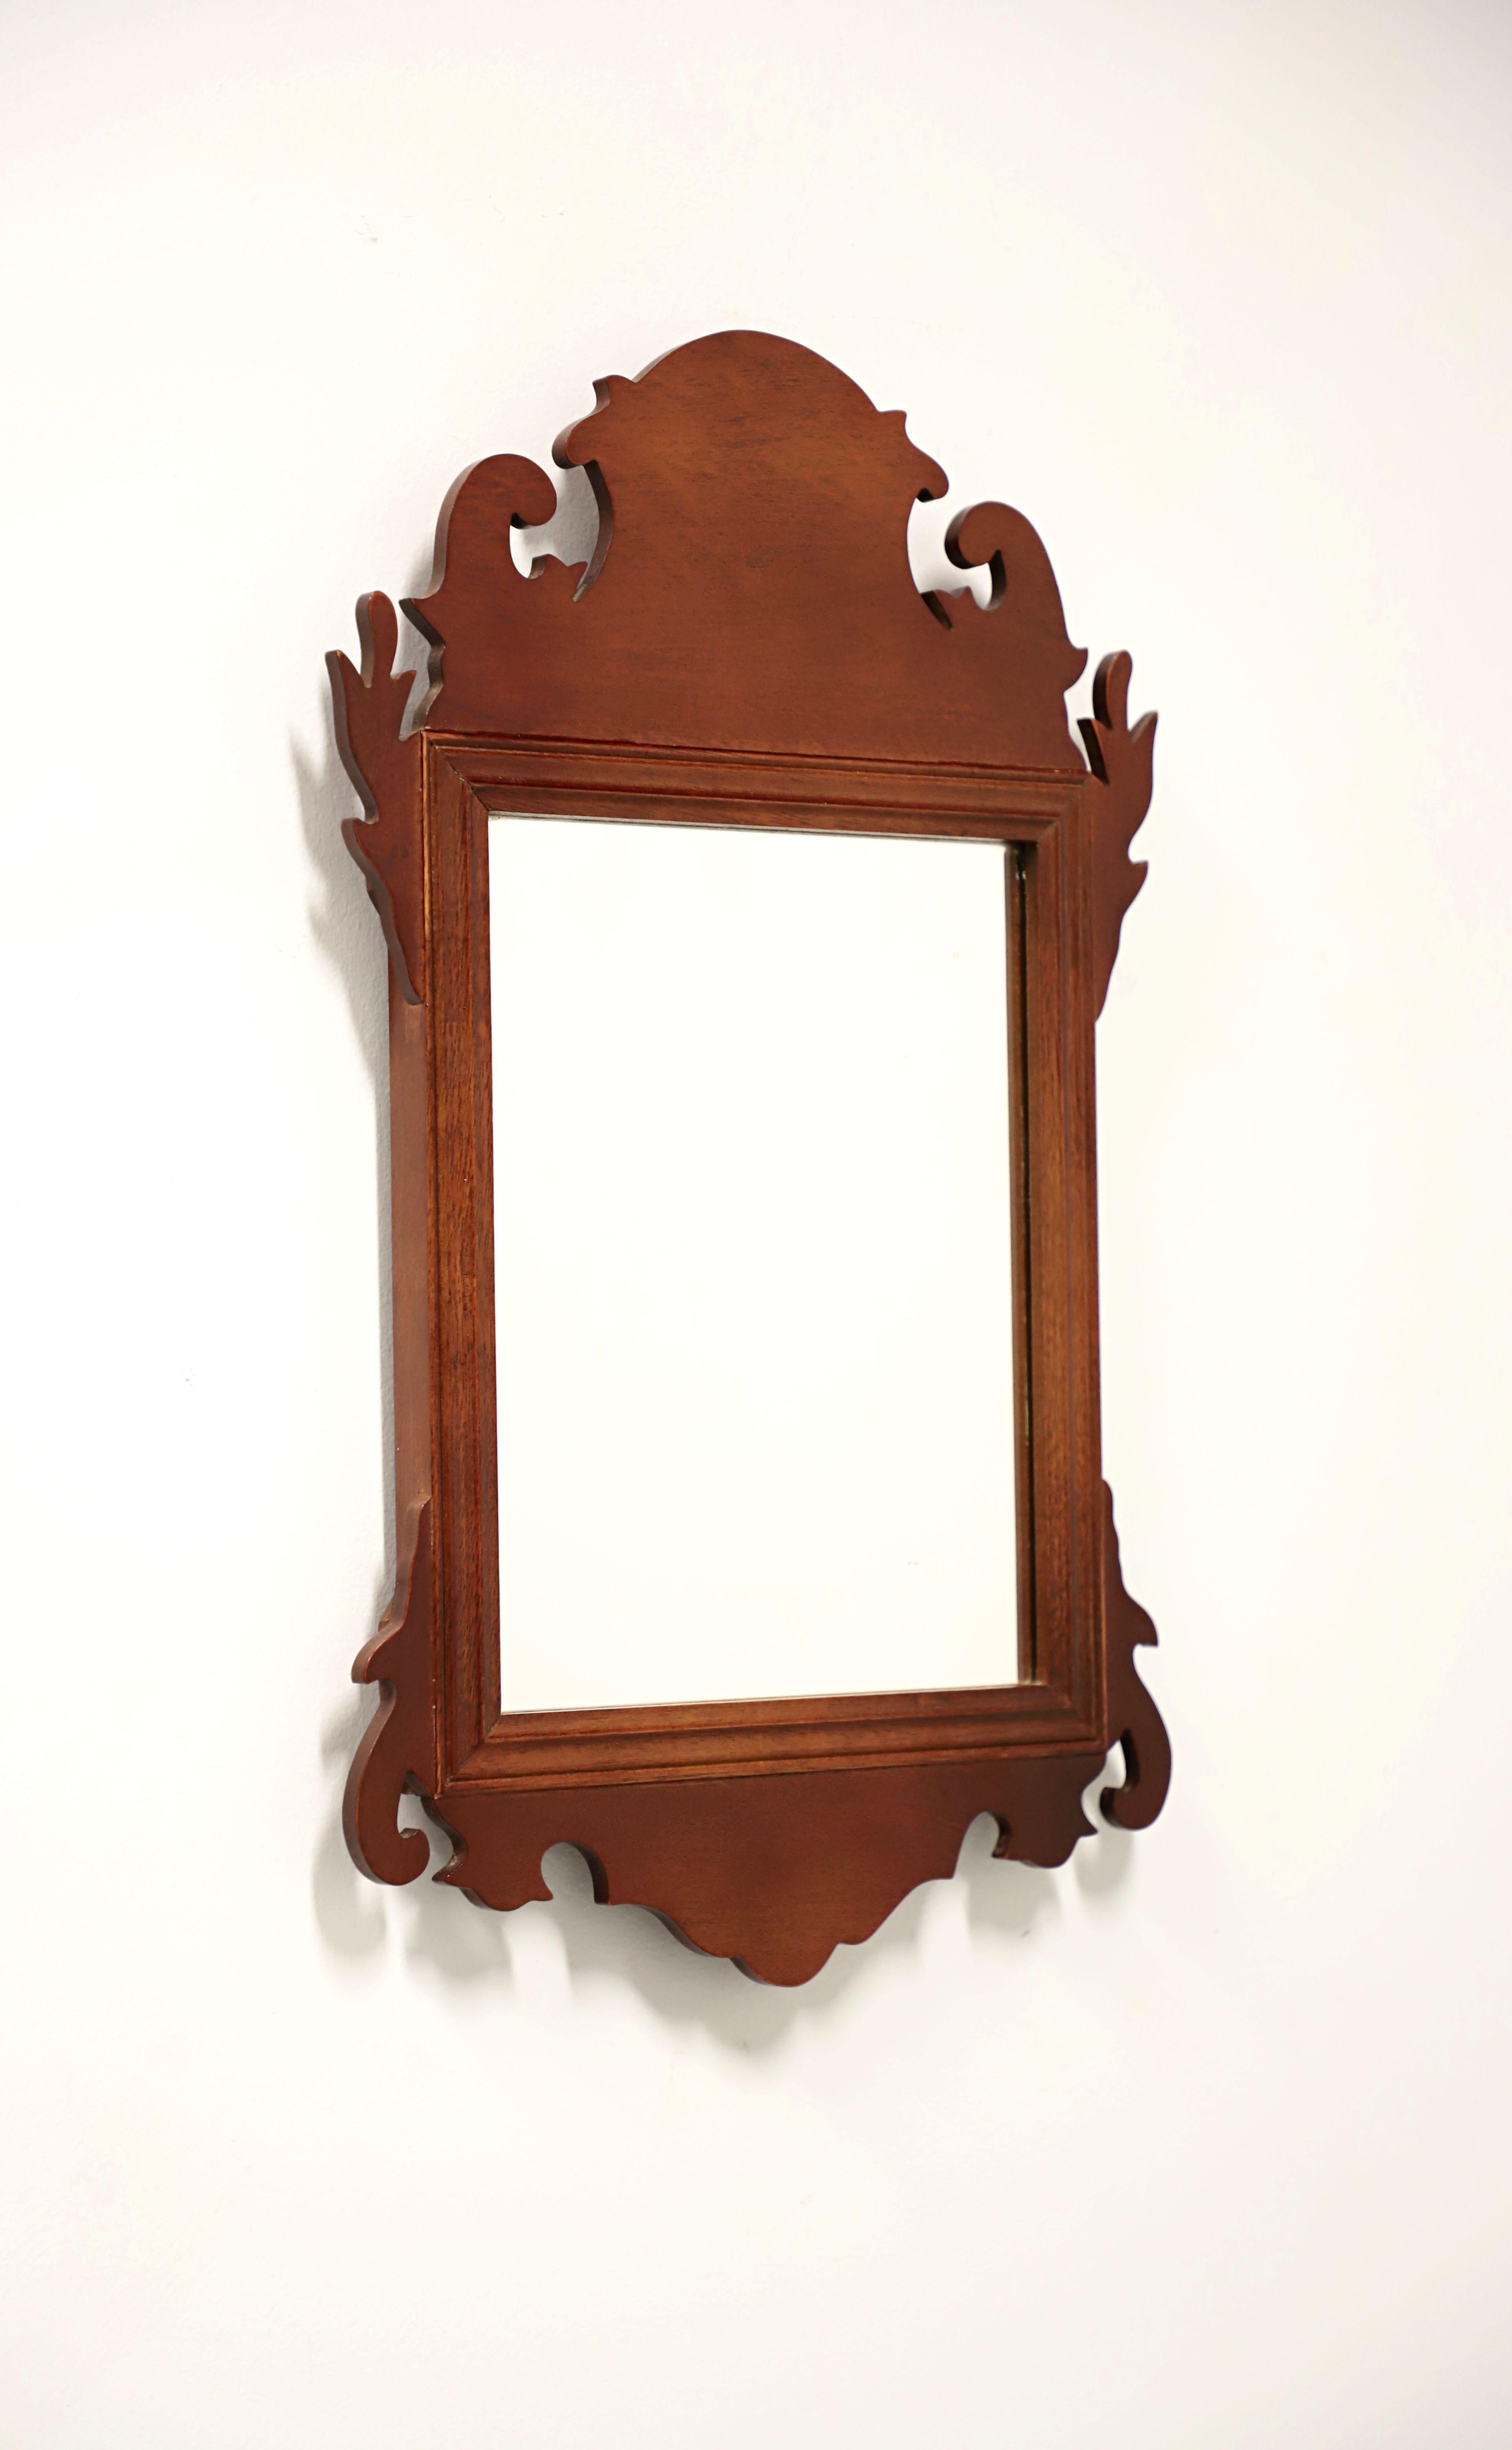 A Chippendale style petite wall mirror by Virginia Metalcrafters, from their Colonial Williamsburg Reproductions made exclusively for Colonial Williamsburg. Mirrored glass, mahogany frame with decorative carving to top and bottom. Made in the USA,